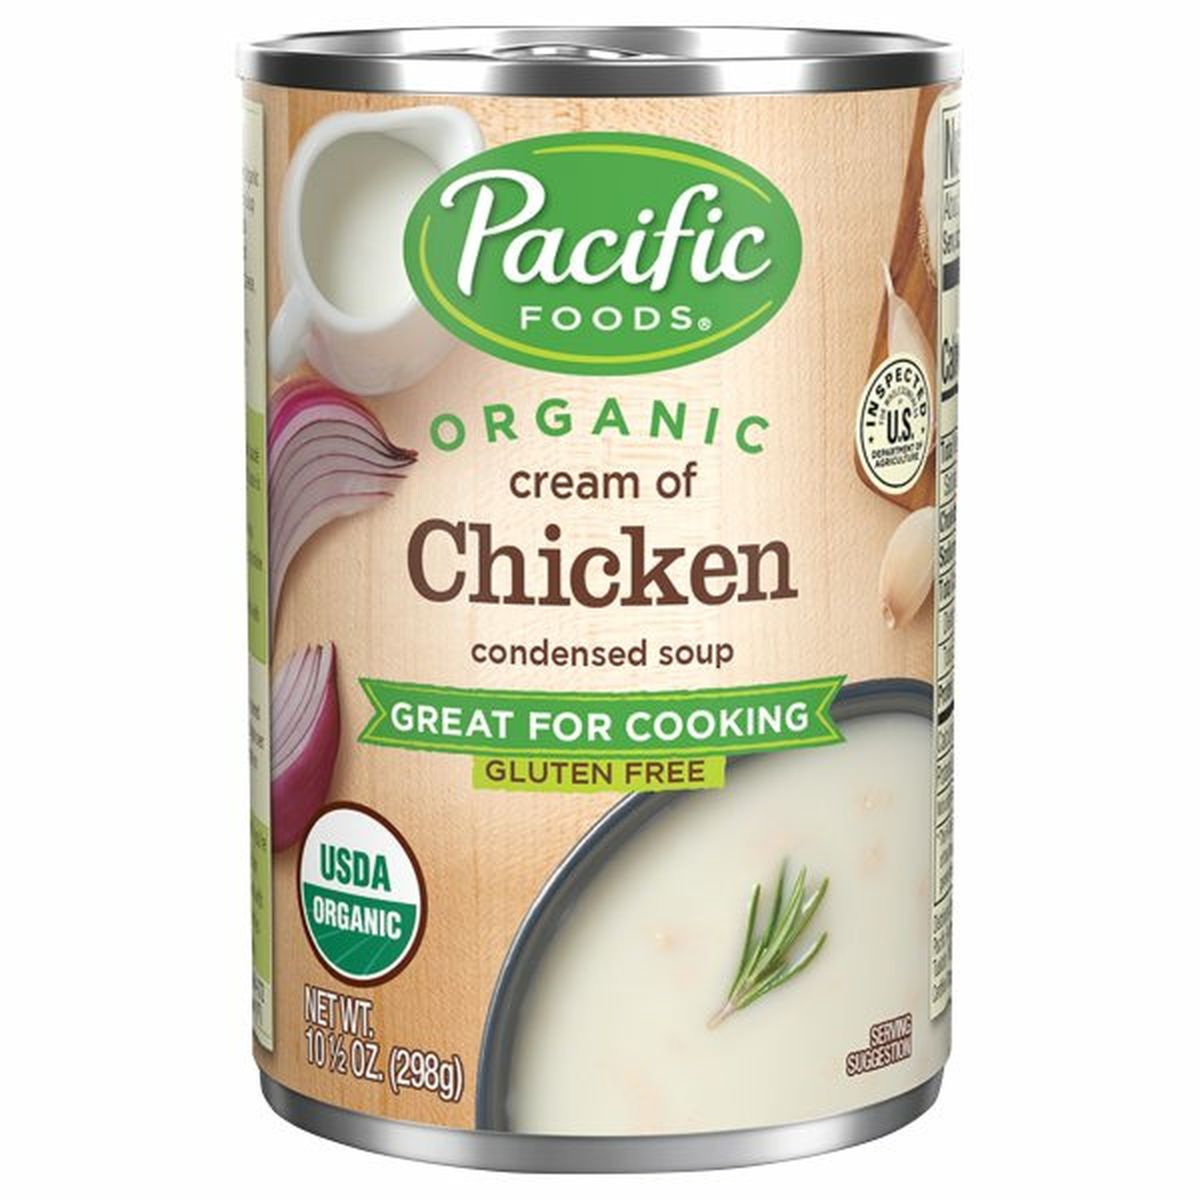 Calories in Pacific Condensed Soup, Organic, Cream of Chicken